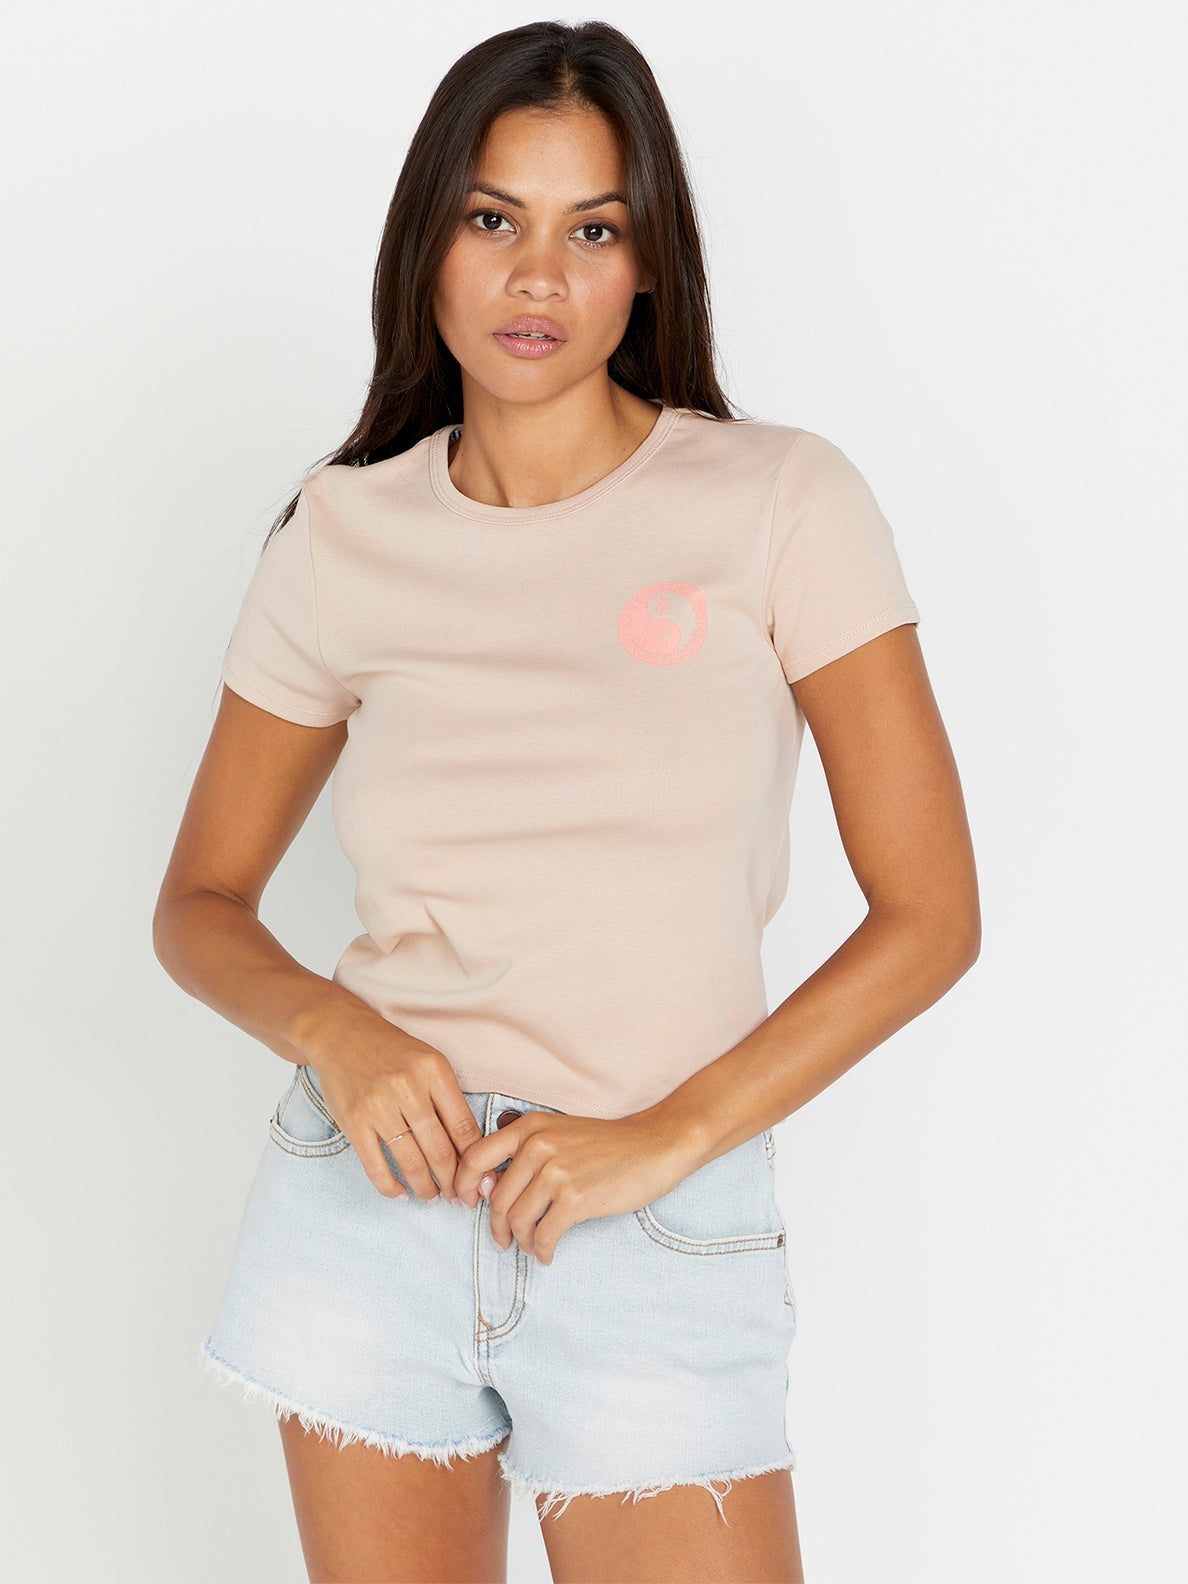 Have A Clue Tee - Dusty Rose